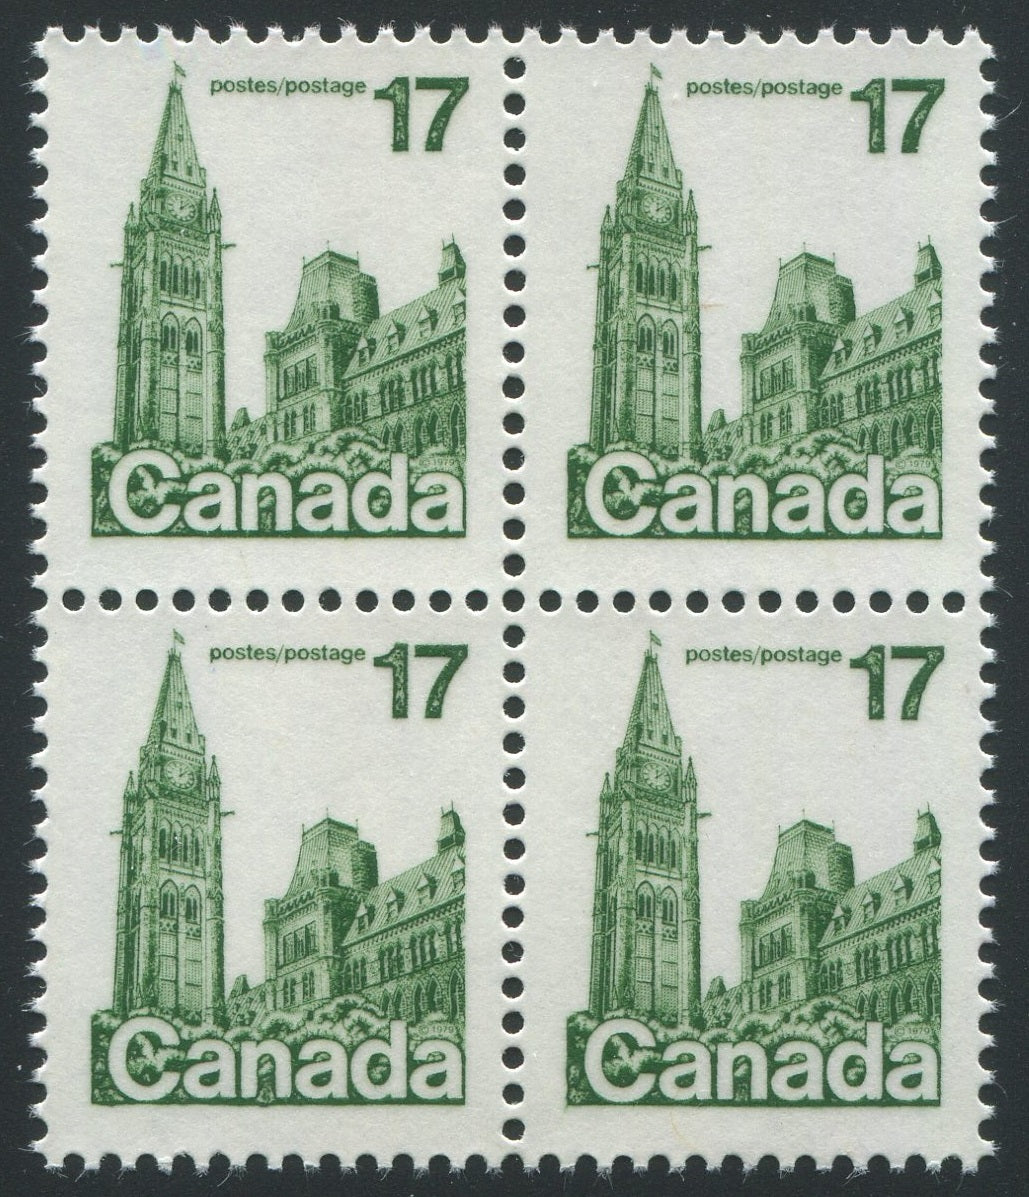 0790CA2008 - Canada #790a - Mint Block of 4, Printed on Gummed Side